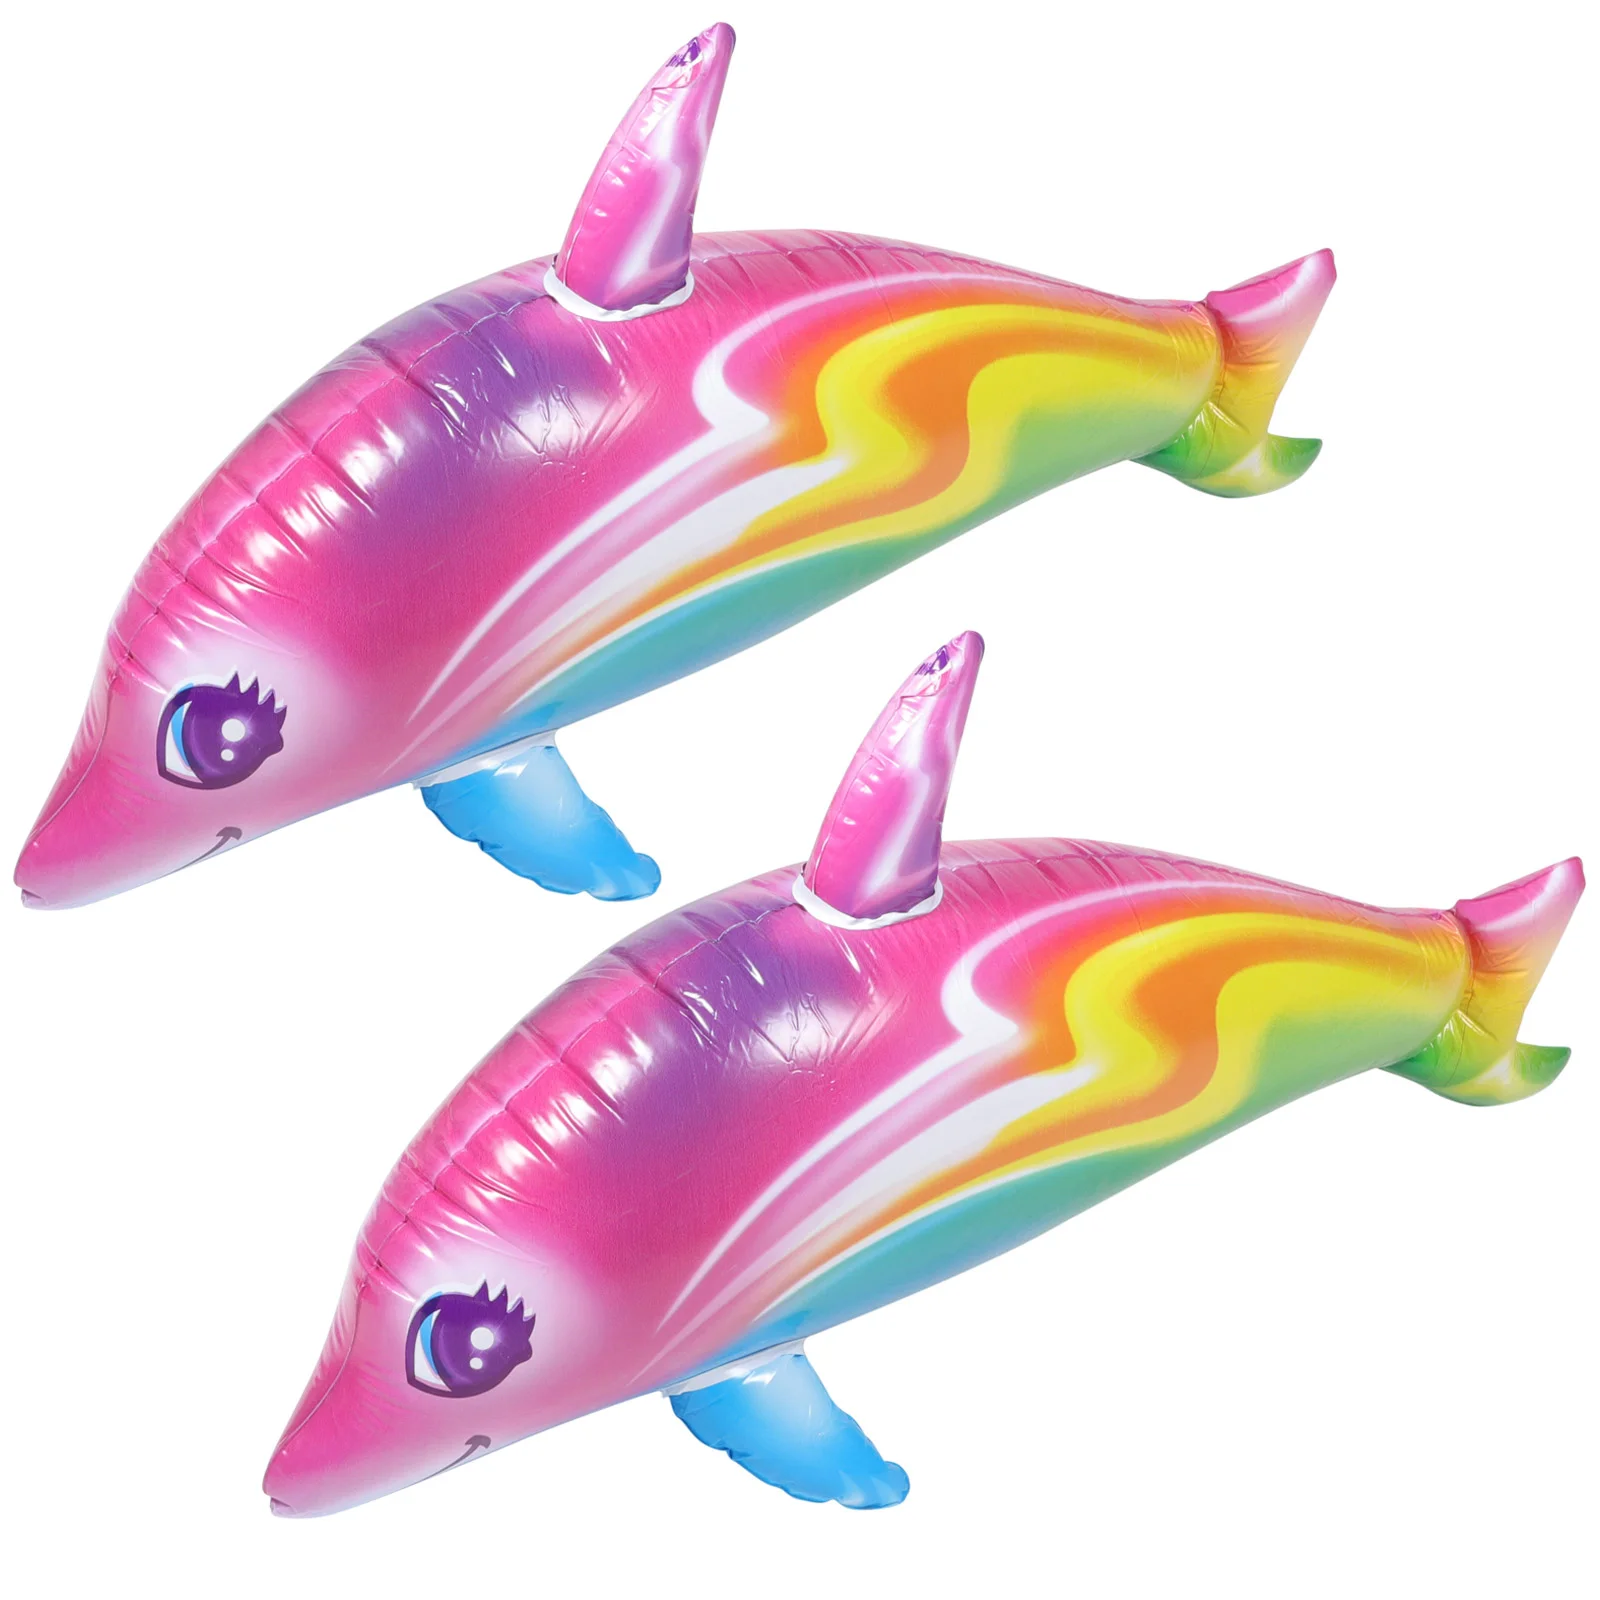 

2 Pcs Inflatable Dolphin Toy Children Party Favors Beach Game Kids Educational Toys Swimming Pool Large Giant